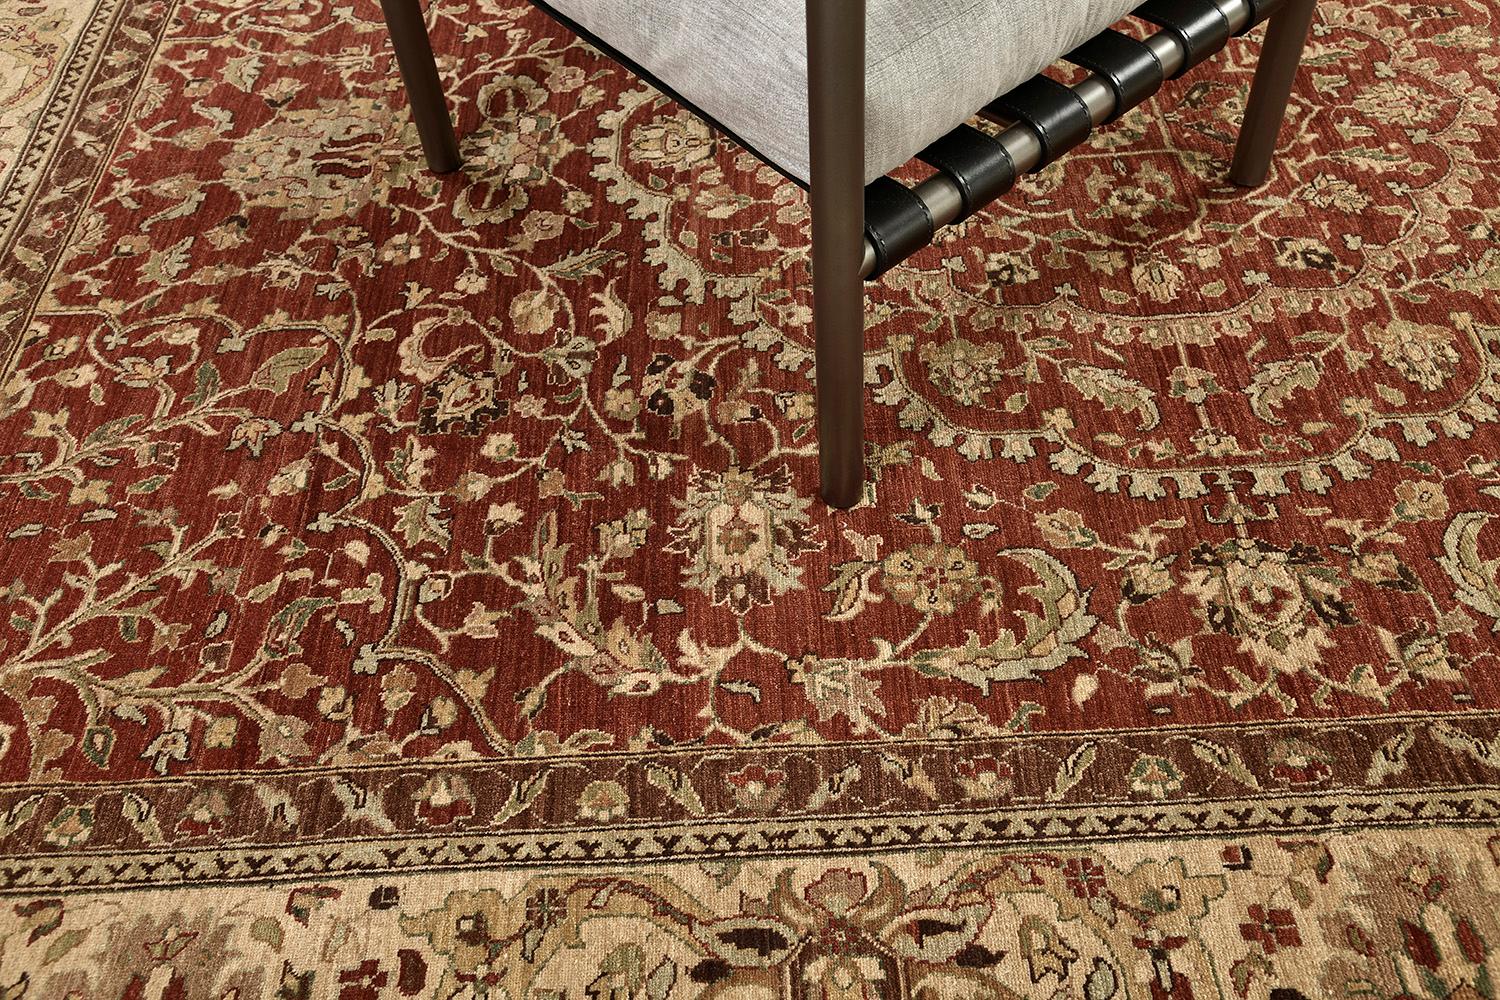 This luxurious hand-spun wool revival of Amritsar using a vegetable dye. Fashionable florid designs and leafy scrolls are harmoniously contributed to the surrounded symmetrical florets and vines. The rug dominants a dusty red field, a sand border